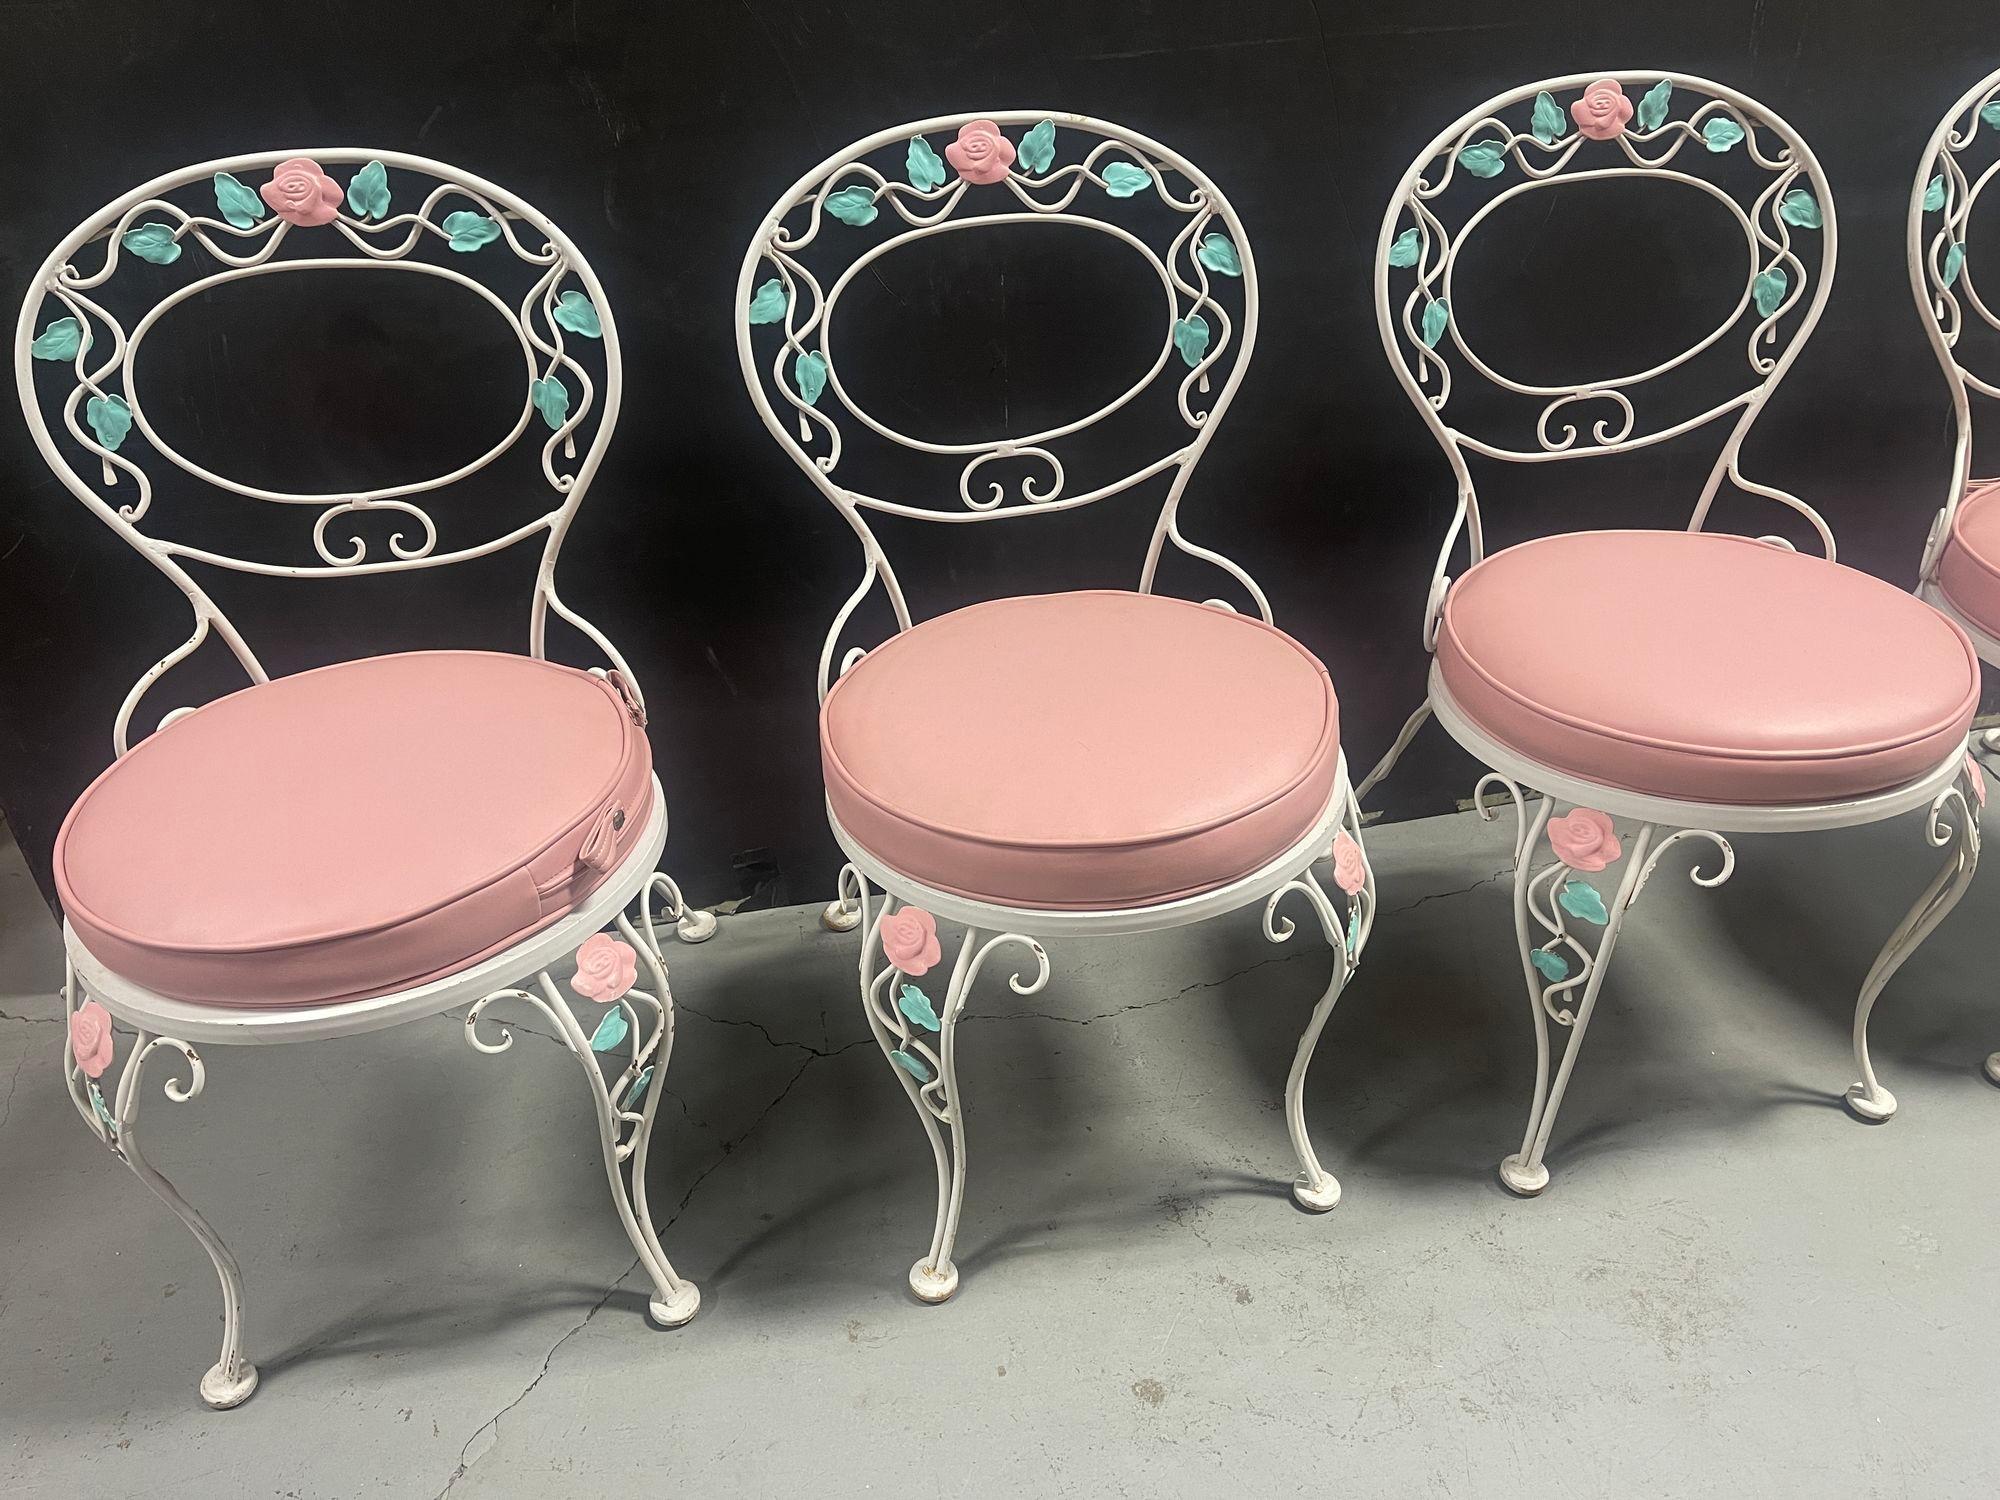 The Pink Rose White Iron Garden Table and Chairs Set embodies elegance and charm, creating a picturesque addition to any outdoor space. Crafted from durable white iron, this set features intricately designed rose motifs adorning the table and